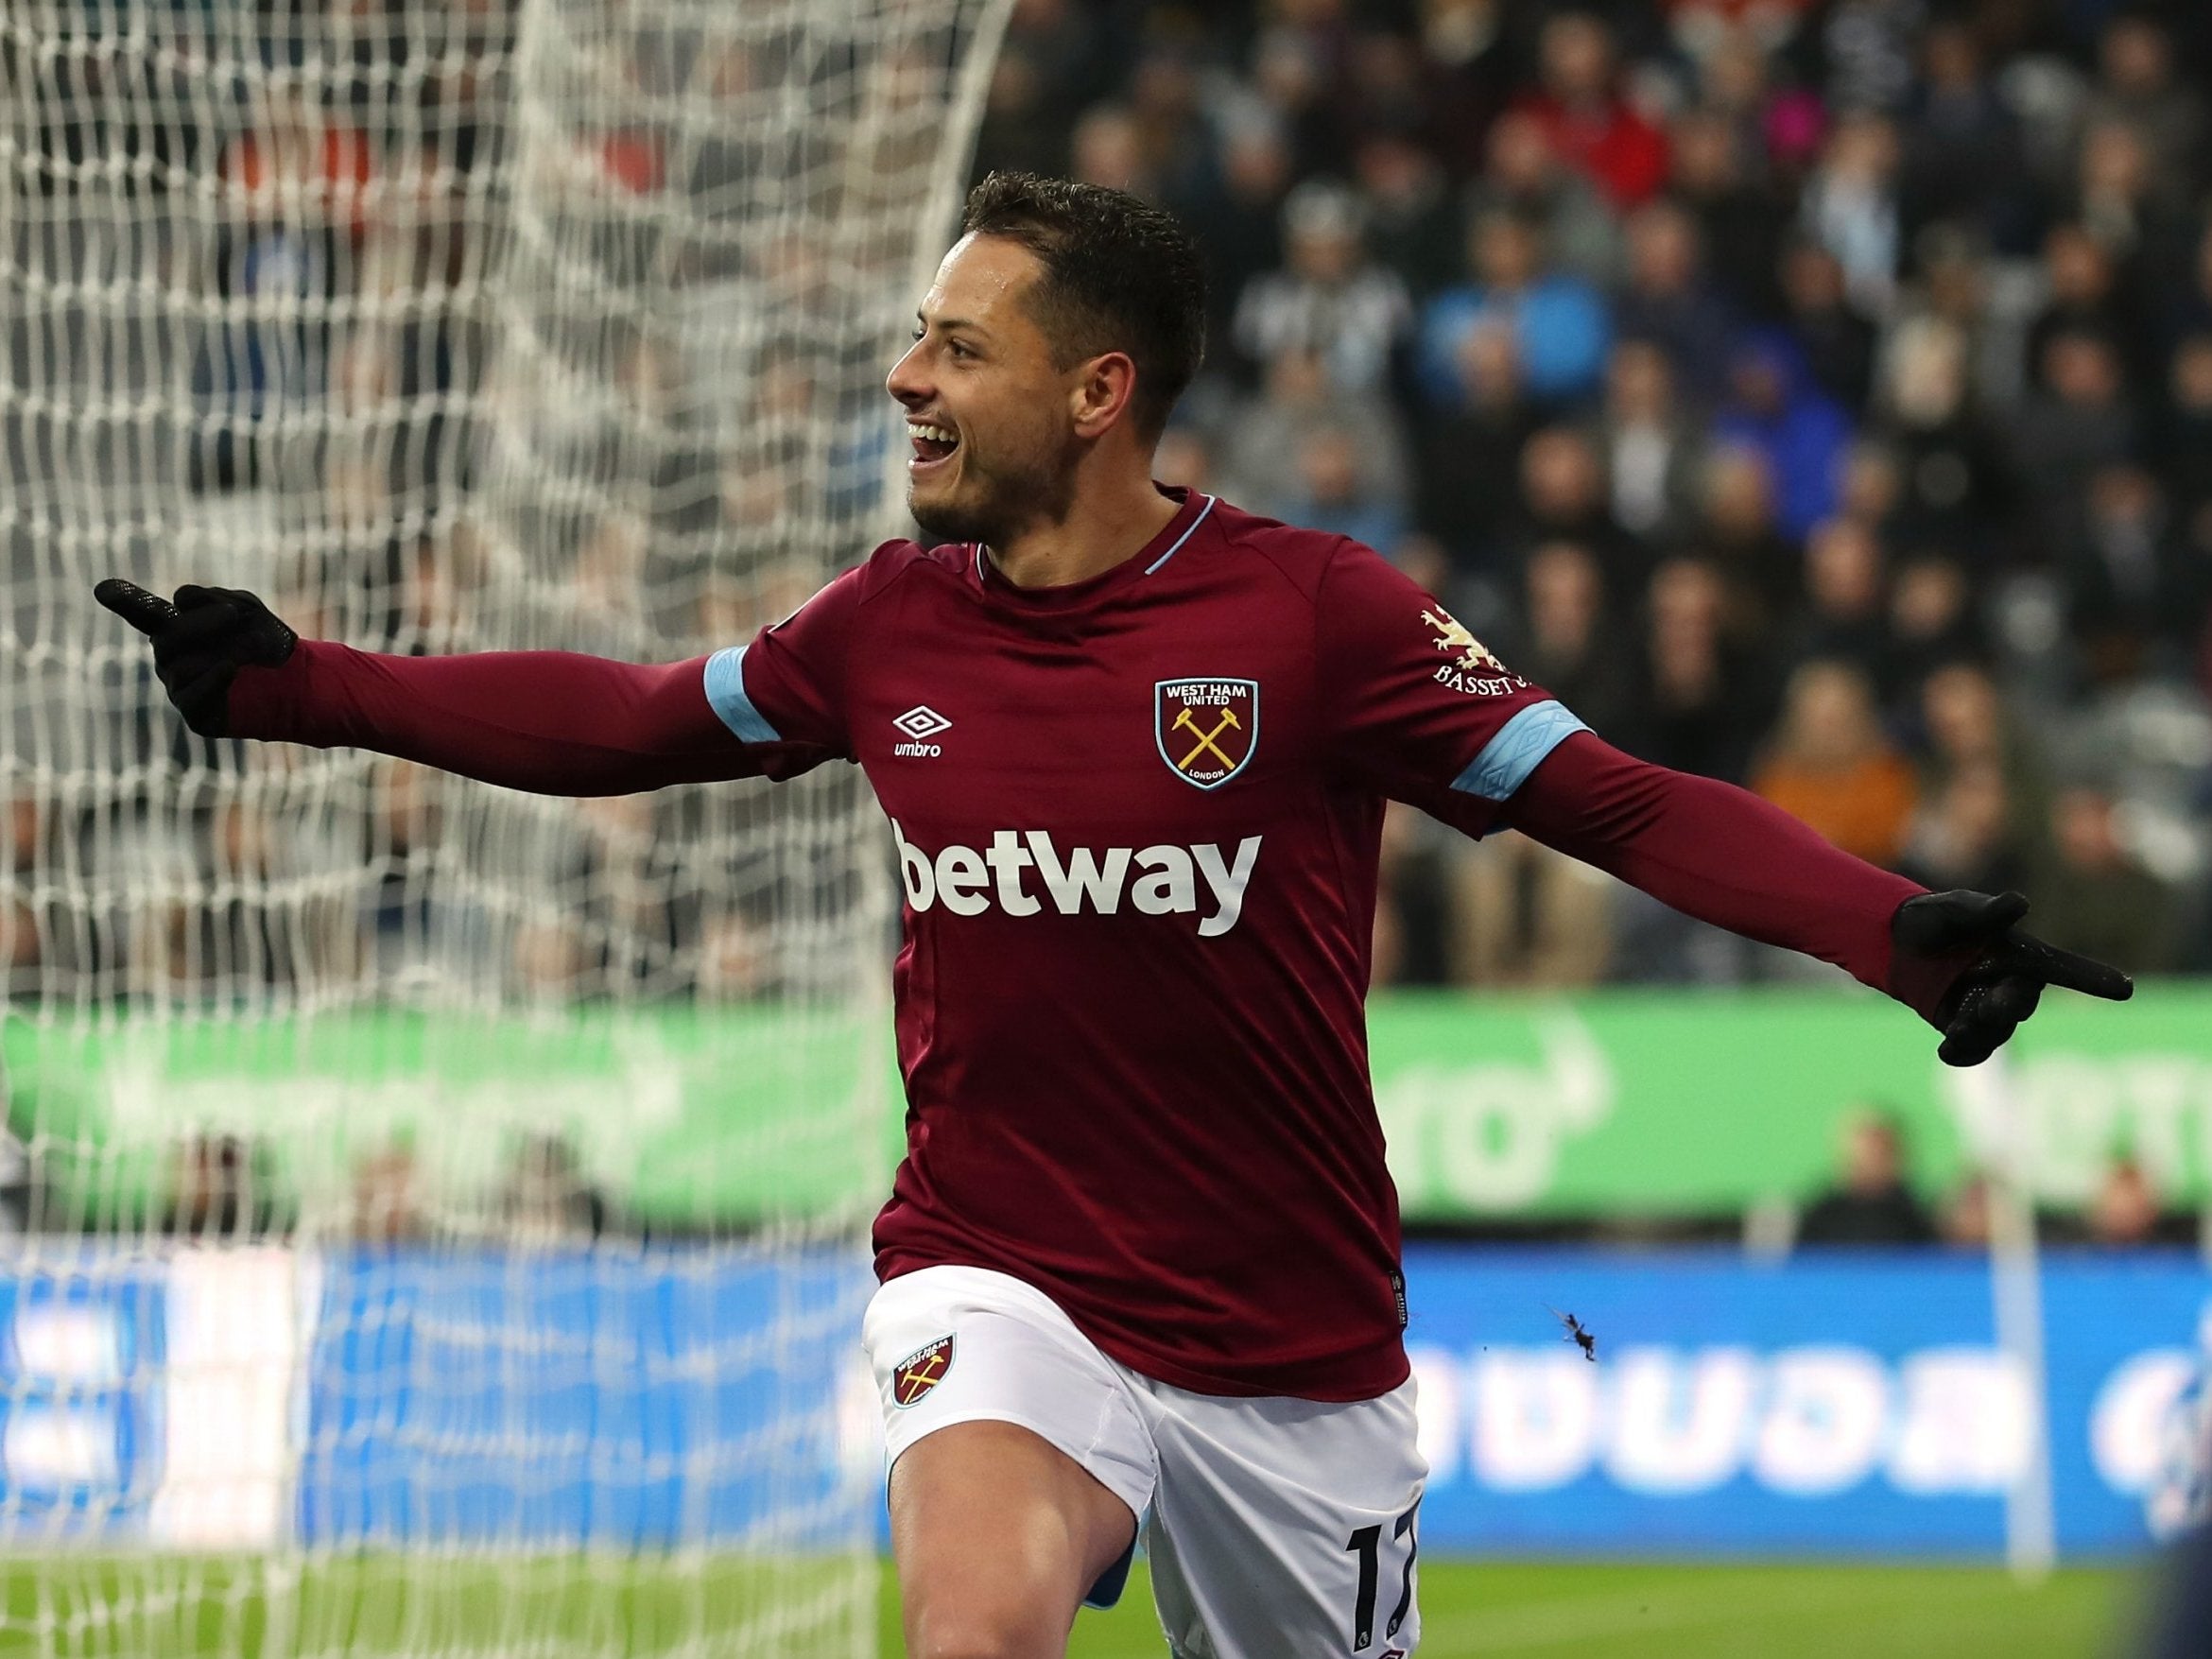 Javier Hernandez inspired the Hammers to a comfortable victory